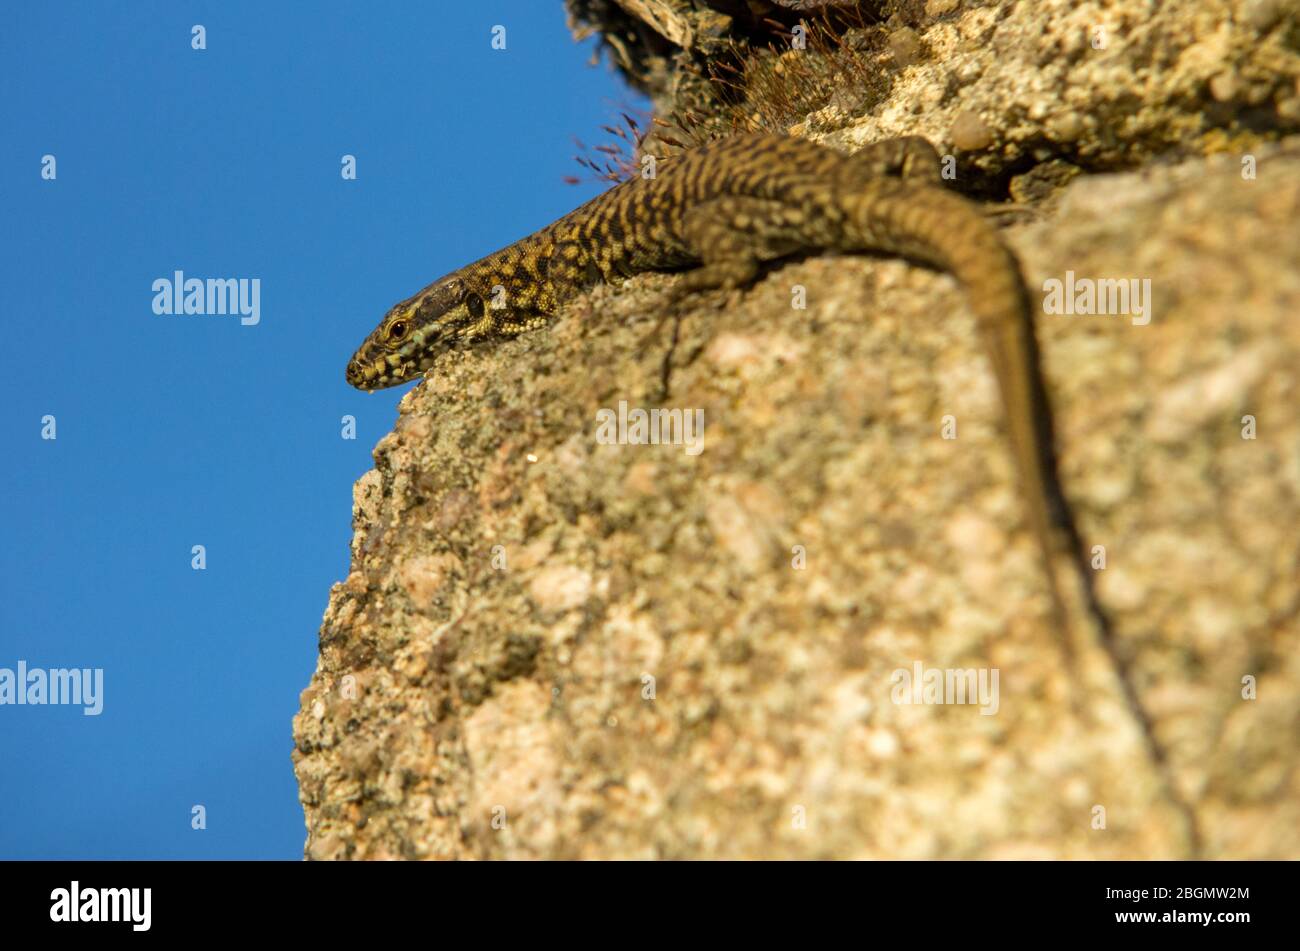 A lizard is well camouflaged on the worn stonework of a rural dwelling, lit by late afternoon sunlight in Poitou Charentes, France. Stock Photo